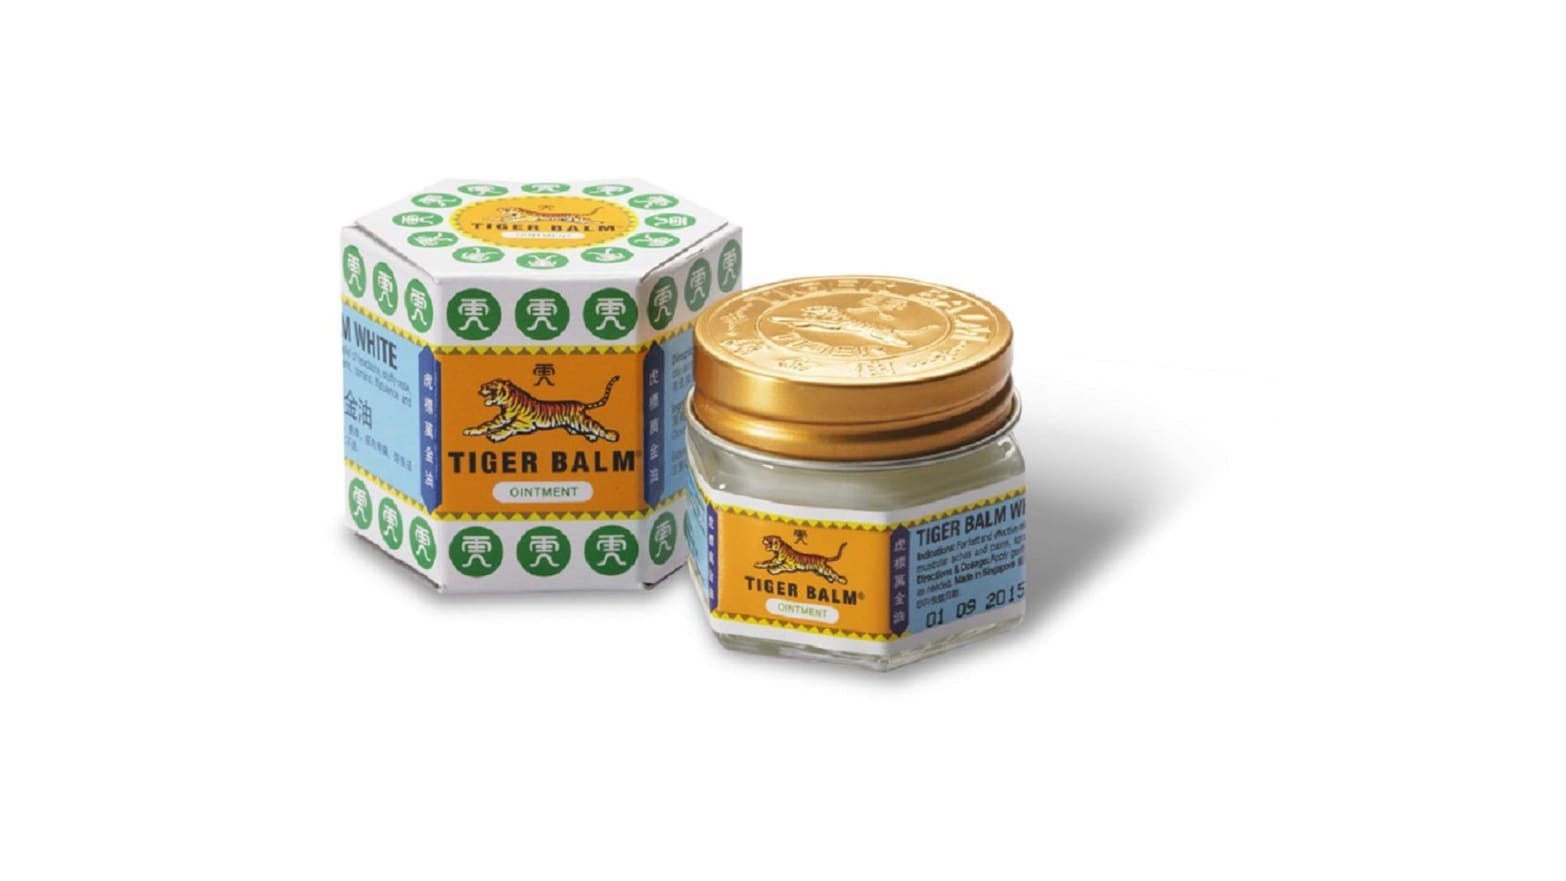 Balm Is The Best for Headaches, Colds, Joint Pain, and